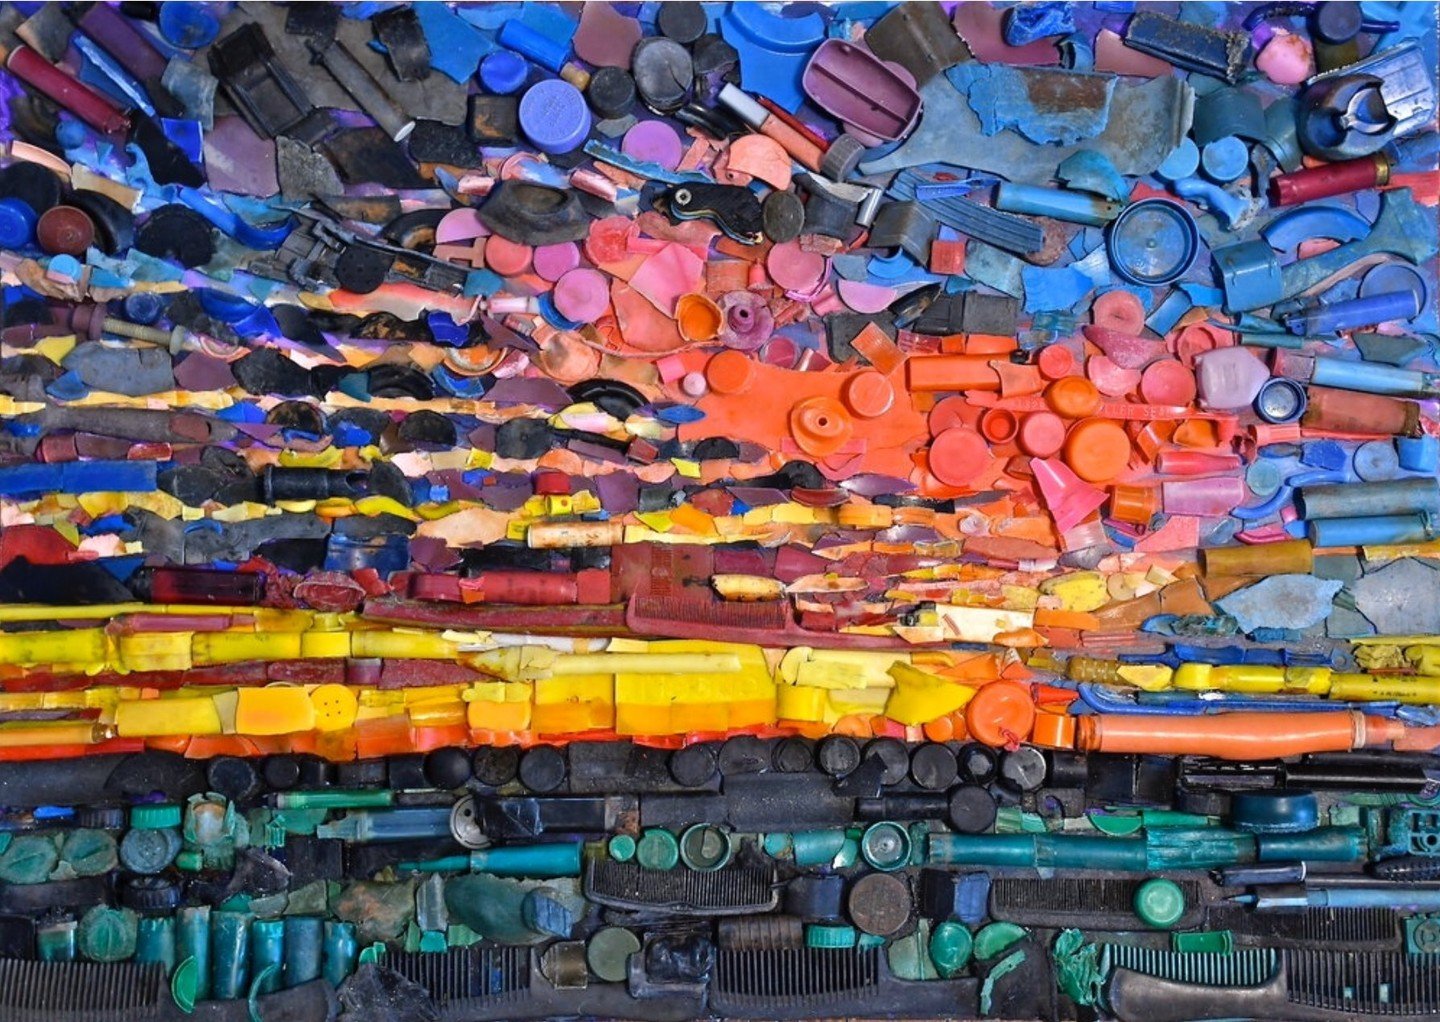 Harry DeLorme ⁠
⁠
Plastic Marsh, Sunset Across U.S. 80 (2019)⁠
⁠
Found plastic debris from McQueen&rsquo;s Island, Savannah River, over acrylic on panel⁠
27 x 37 &frac12;&rdquo; (framed)⁠
⁠
DeLorme intercepts discarded plastic from the banks of the S